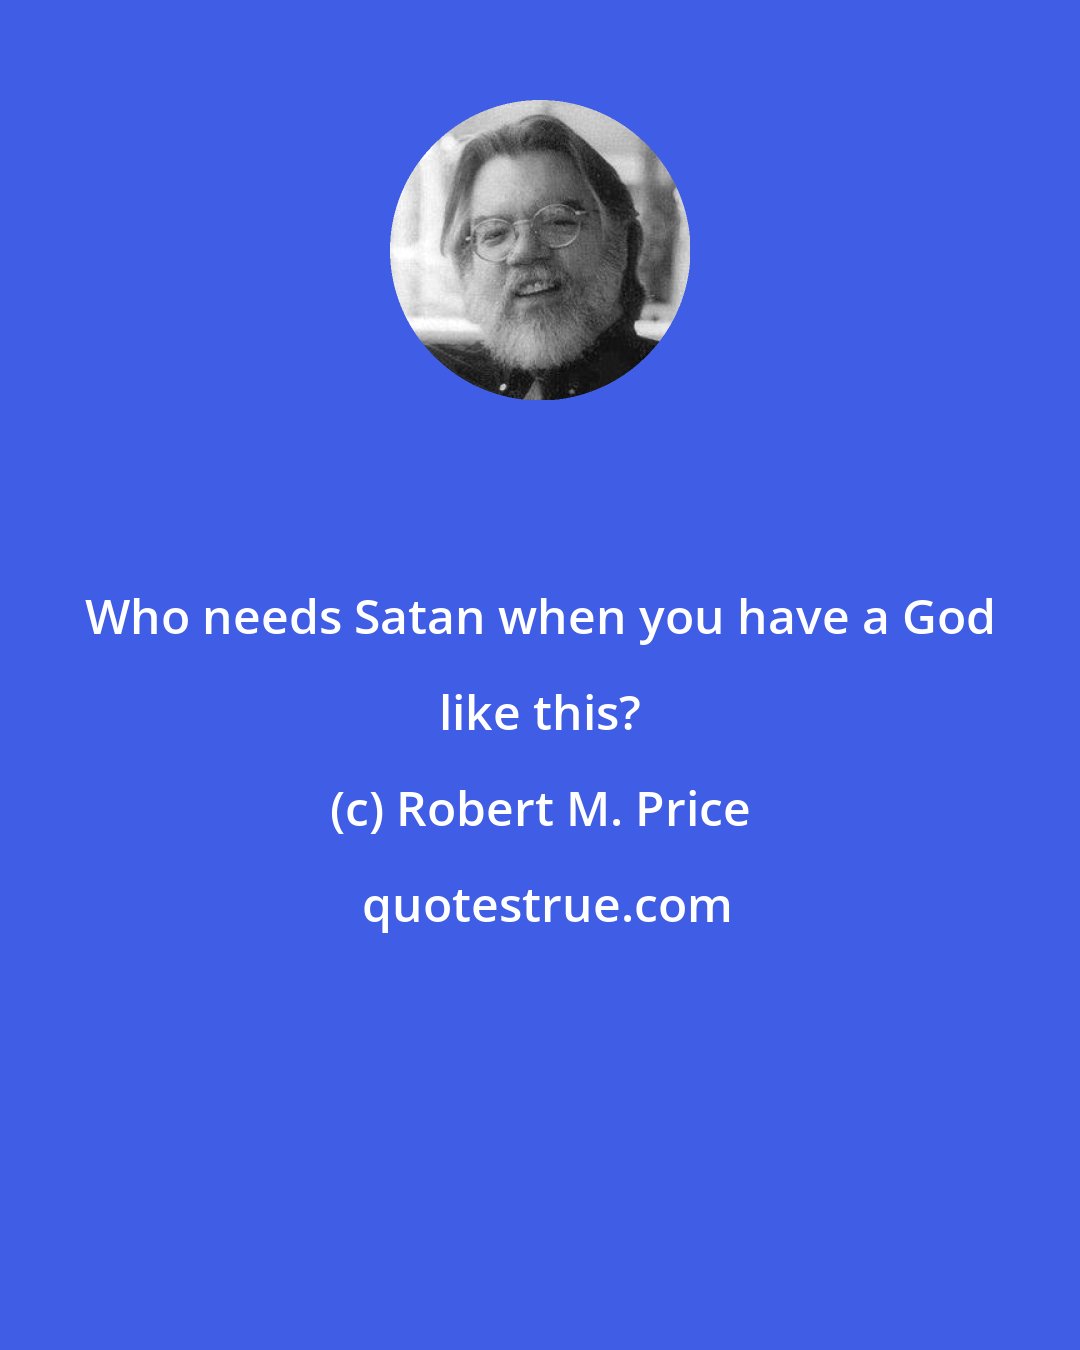 Robert M. Price: Who needs Satan when you have a God like this?